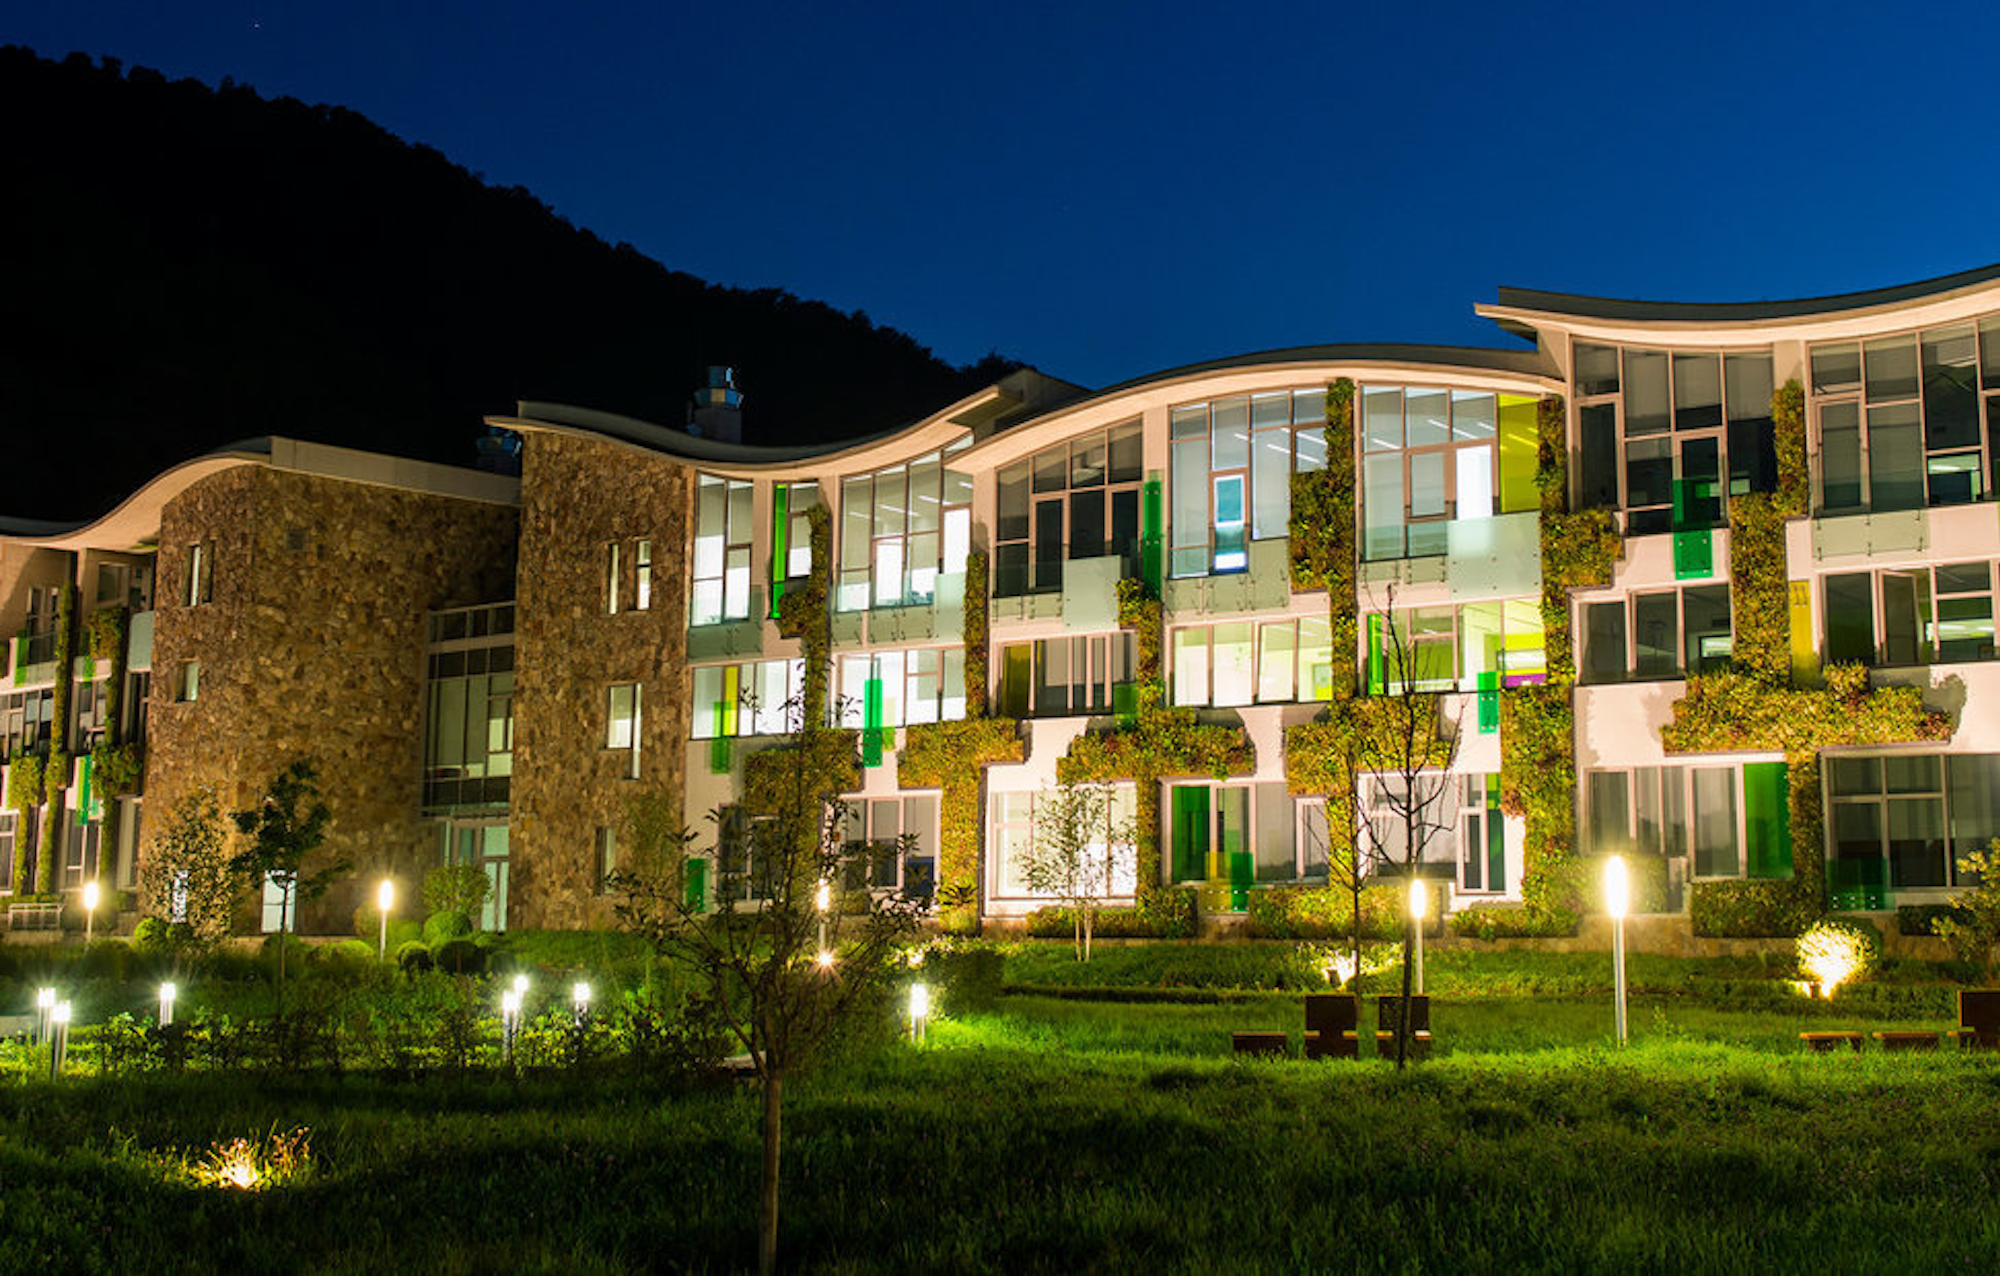 Dilijan International School In Armenia With Living Walls  On Campus At Night